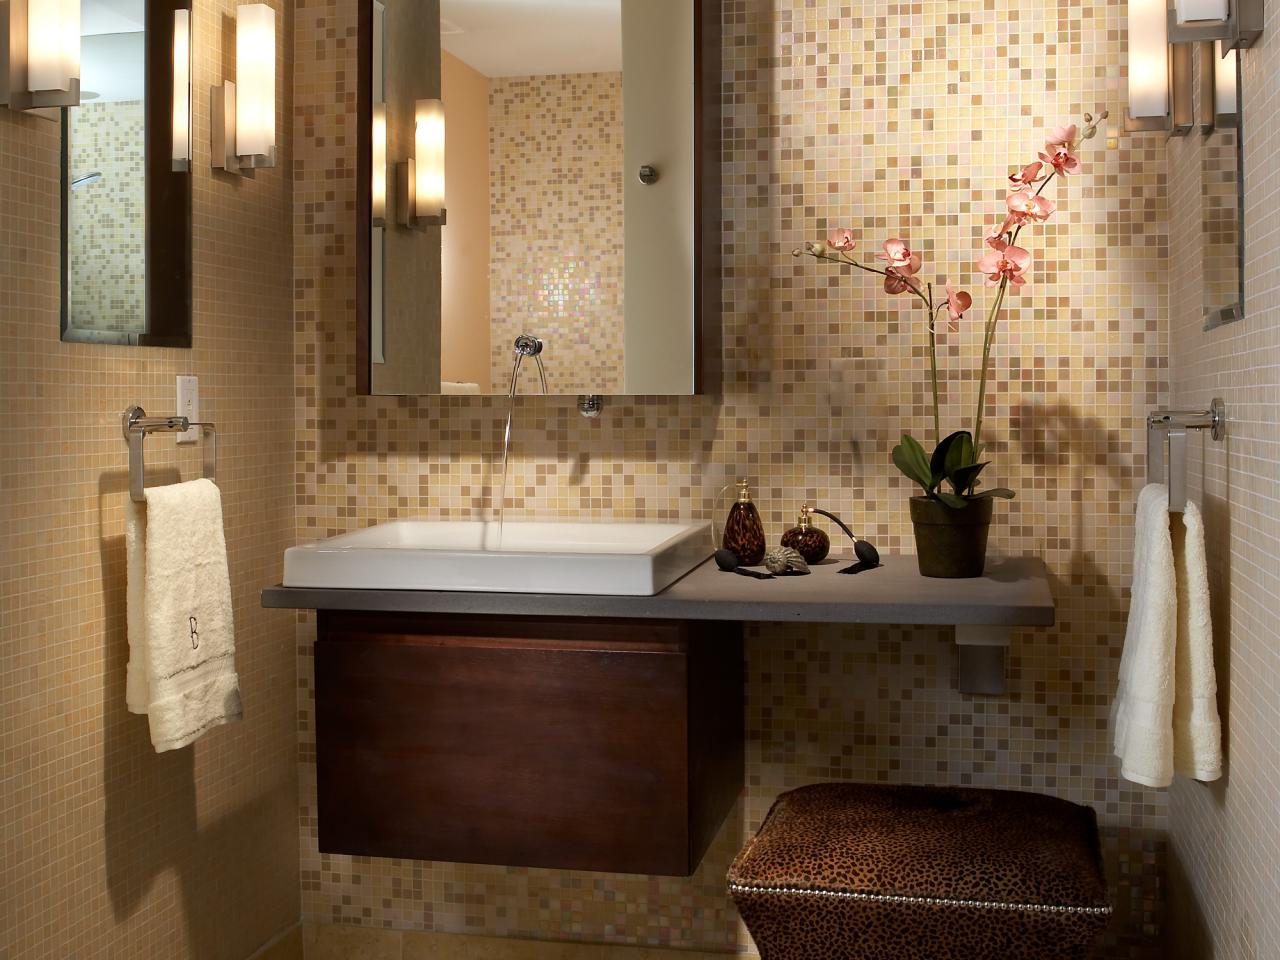 Transform Your Bathroom With Hotel Style HGTV